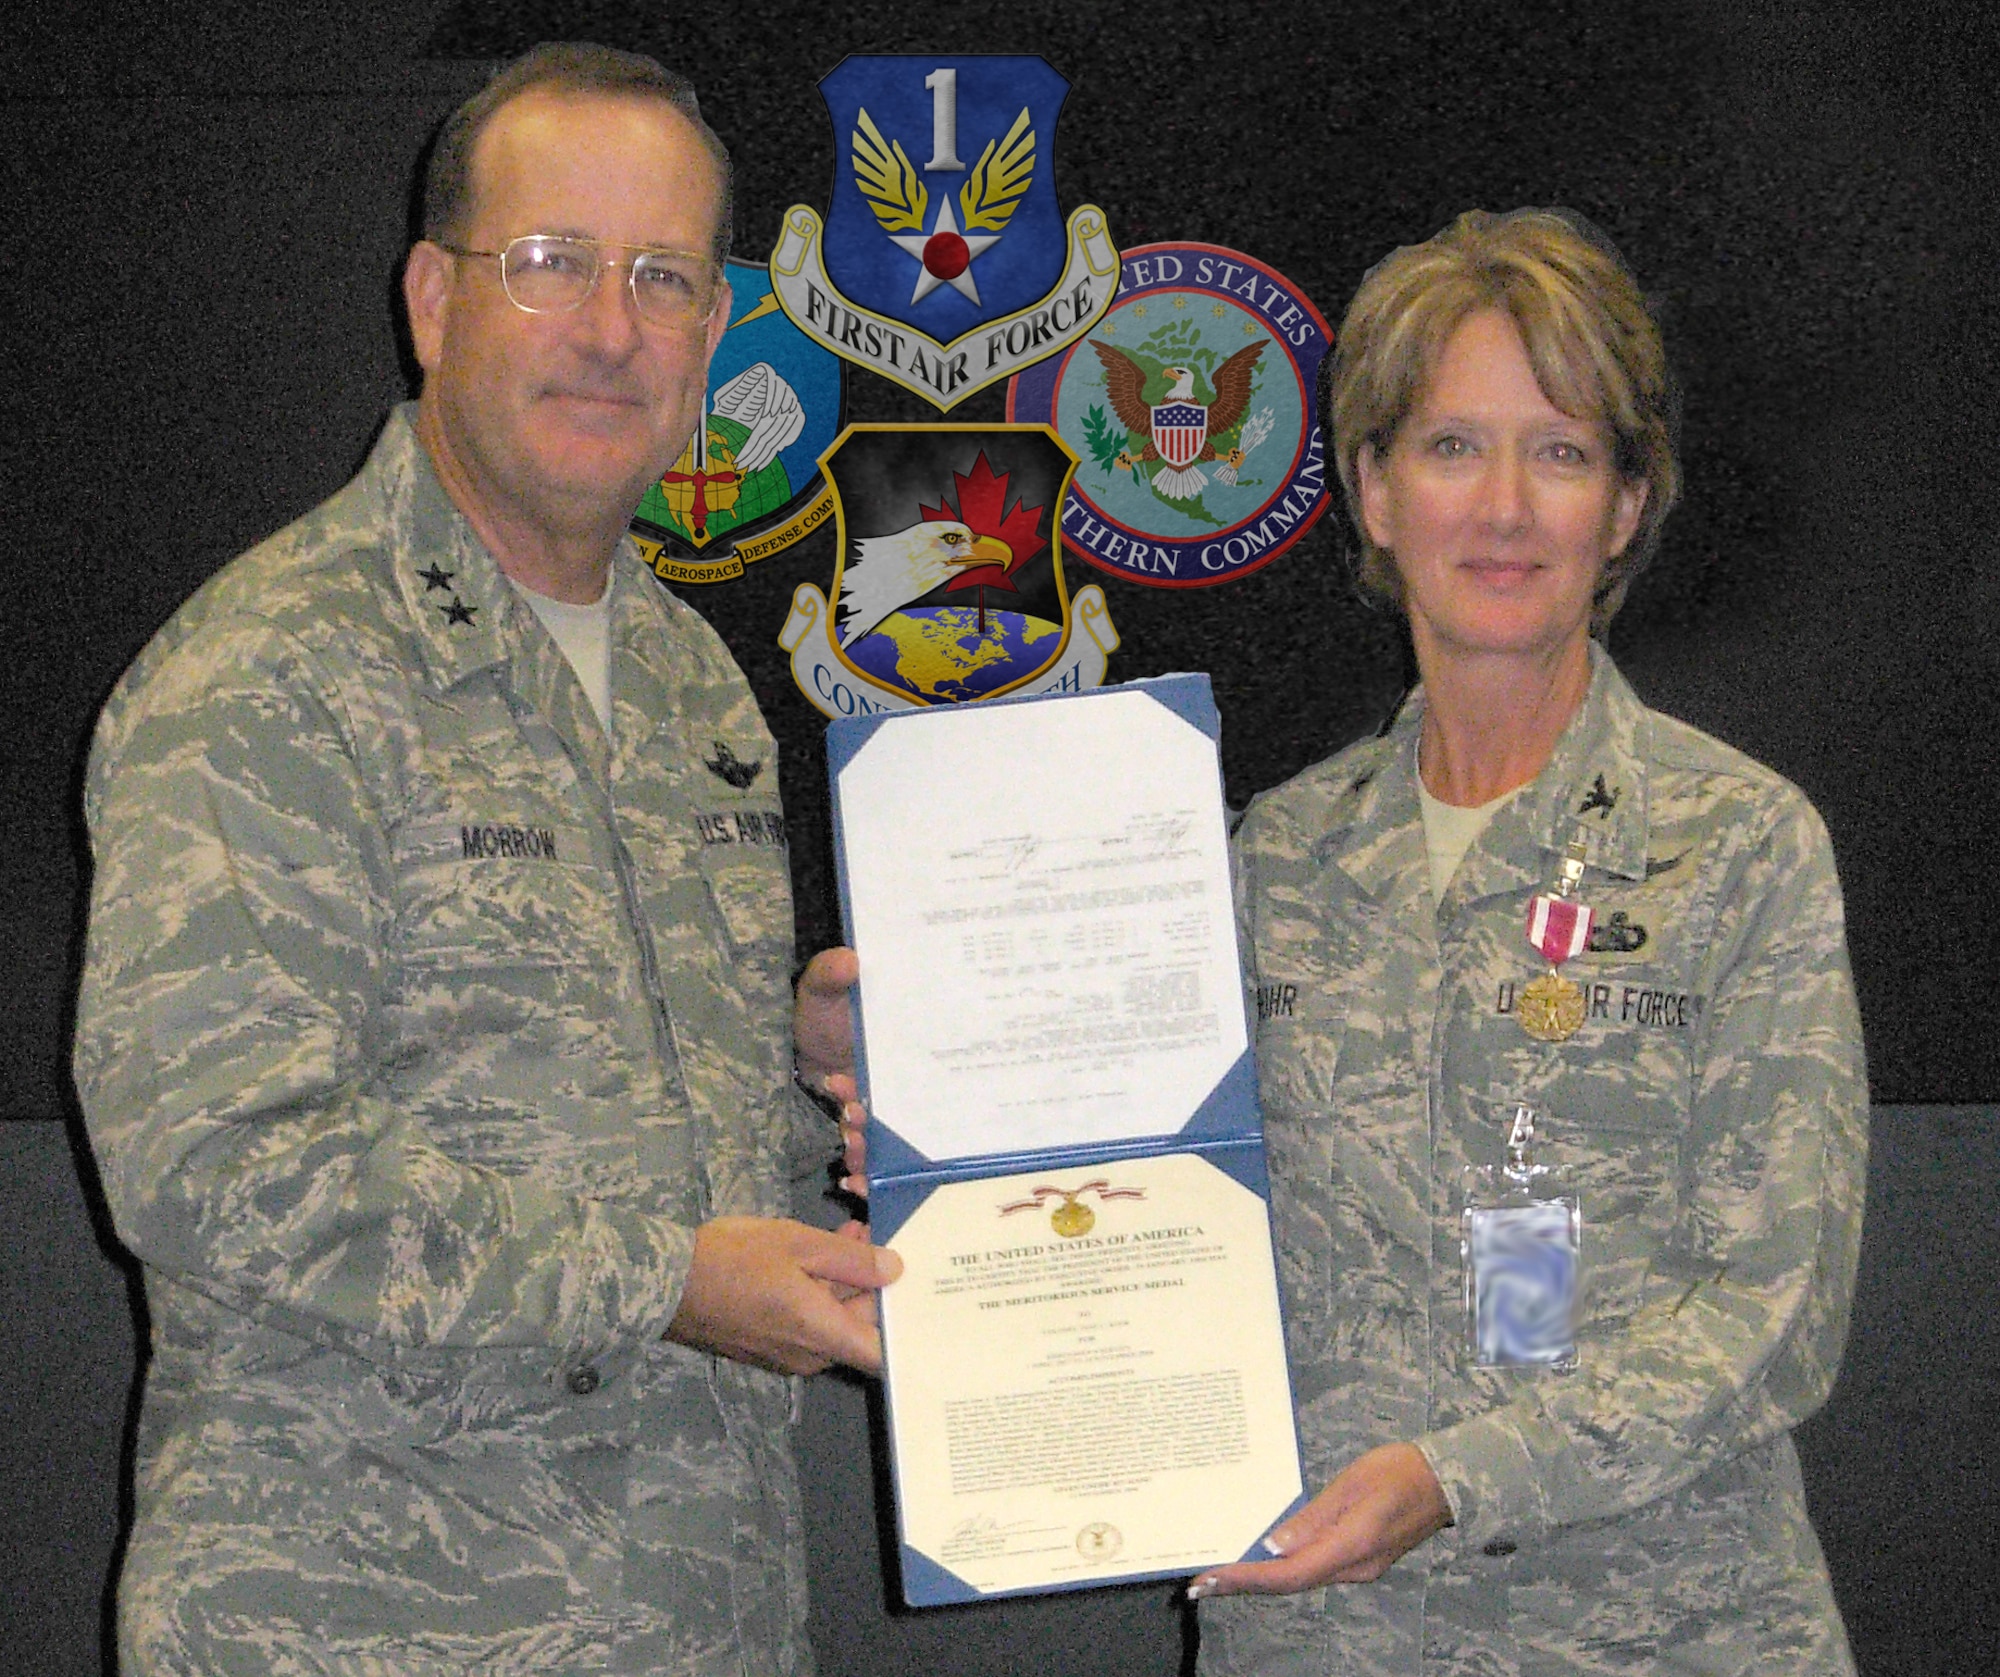 Maj. Gen. Hank Morrow, CONR-AFNORTH commander, presents Air Force Reserve Col. Jane Rohr with the Meritorious Service Medal for her contributions to the Joint Forces Air Component Commander. Graphic illustration by Master Sgt. Jerry D Harlan